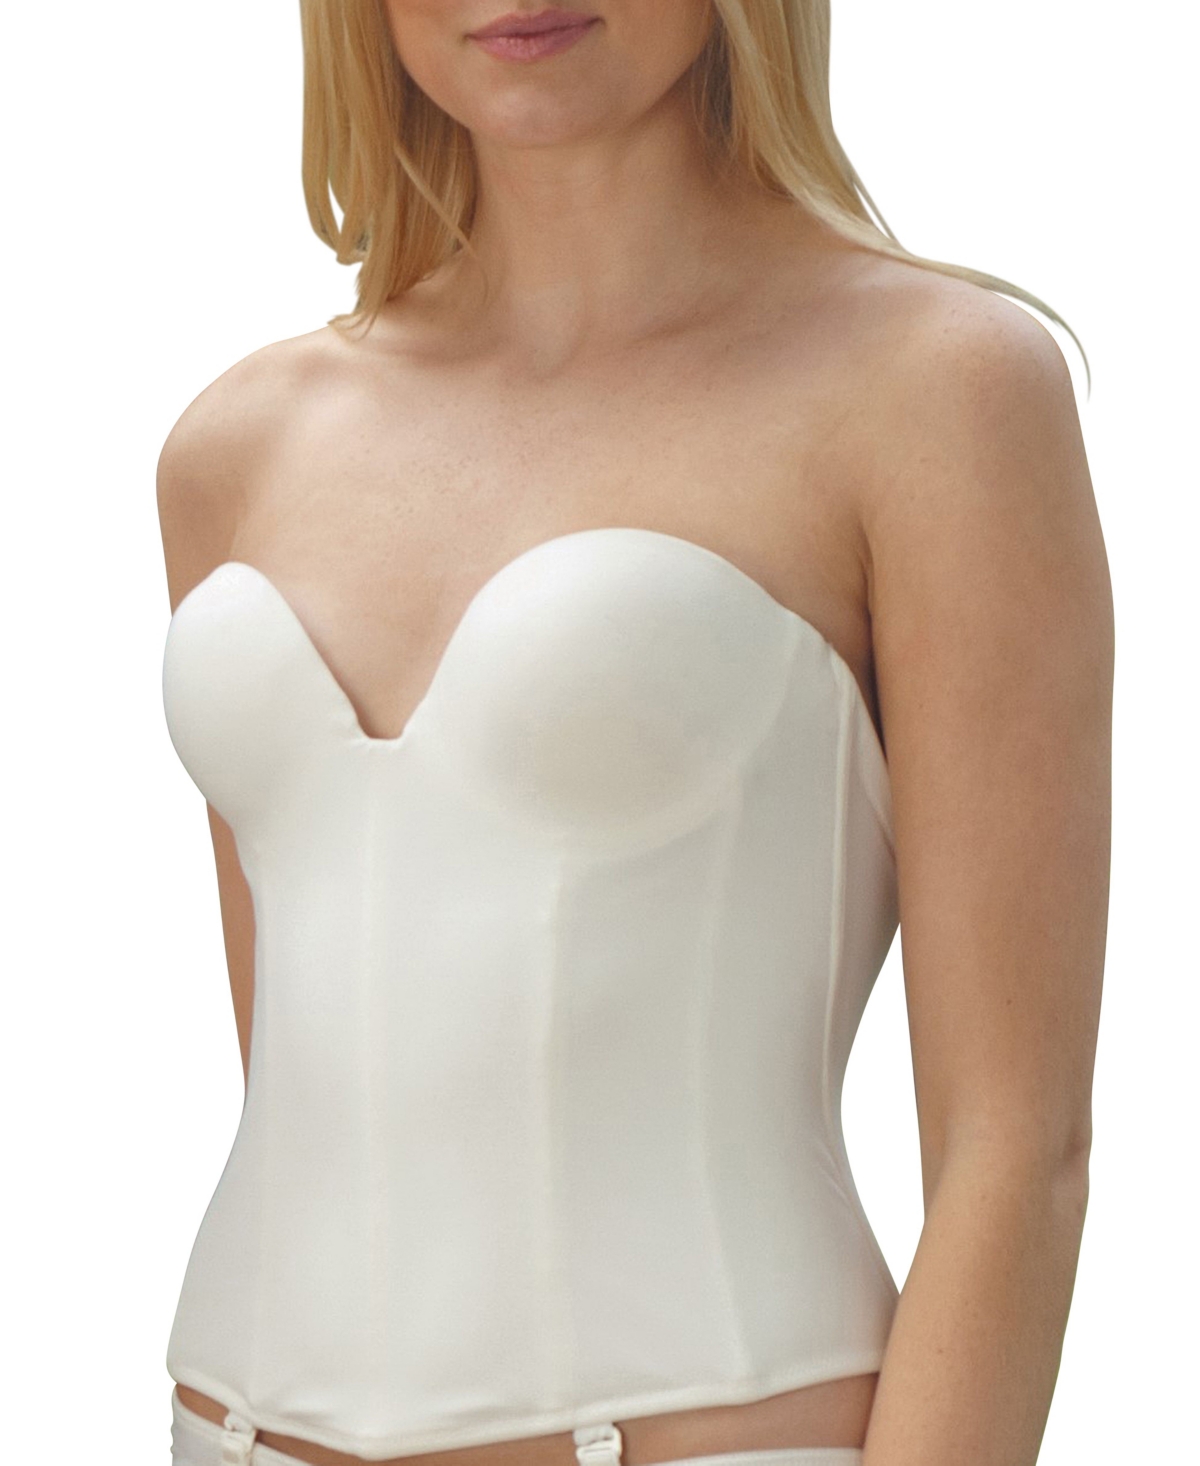 Women's Invisible Strapless Bustier - Nude